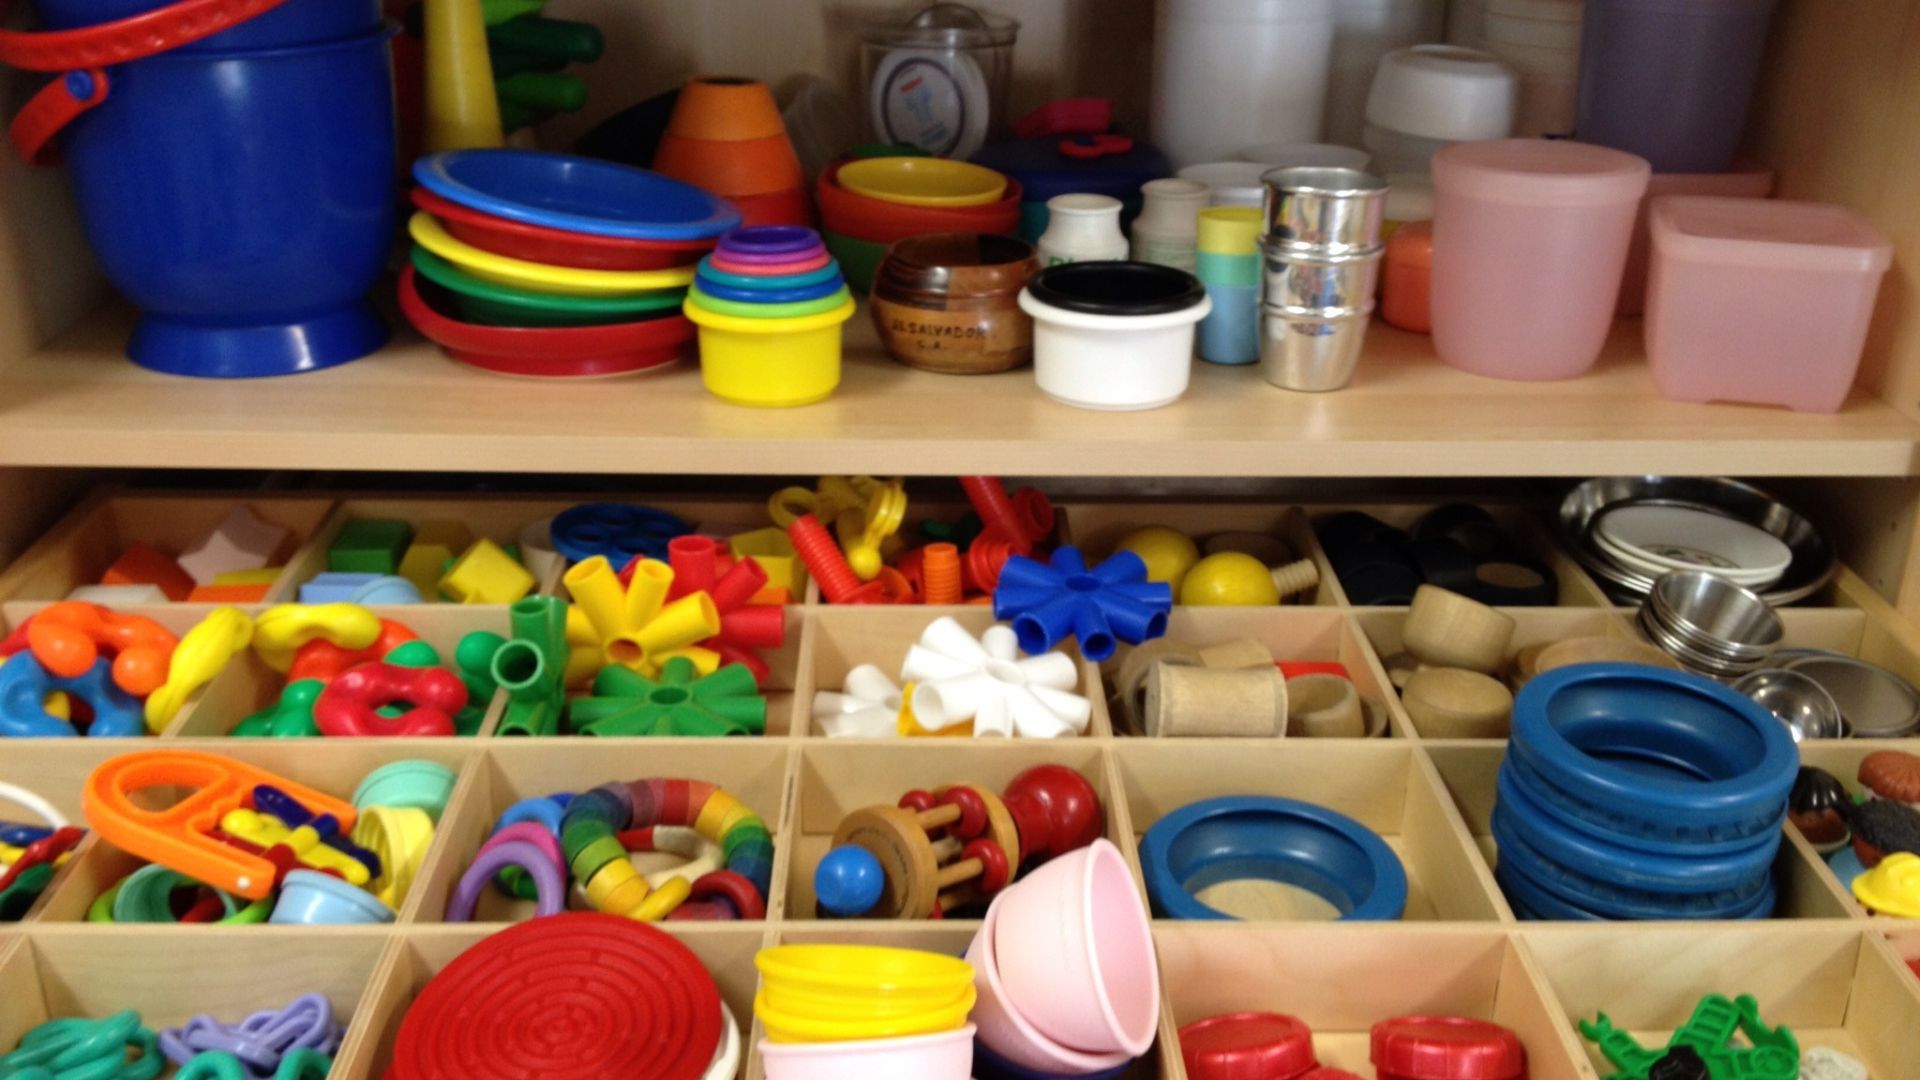 RIE Practice: Choosing Play Objects